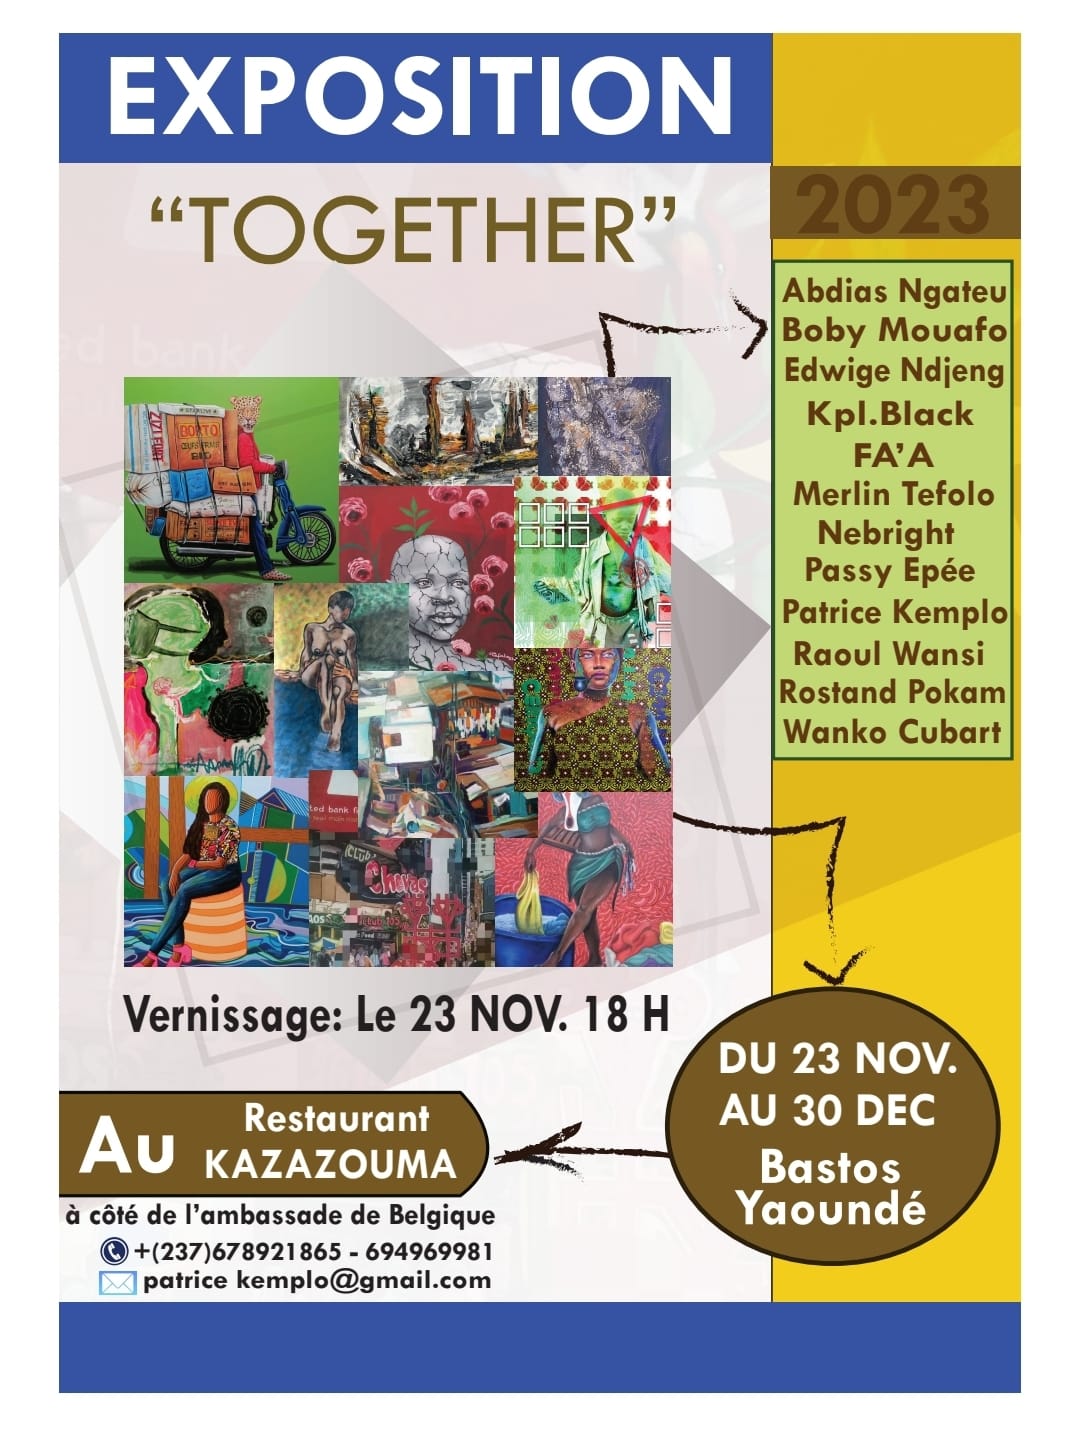 Together Exhibition Poster